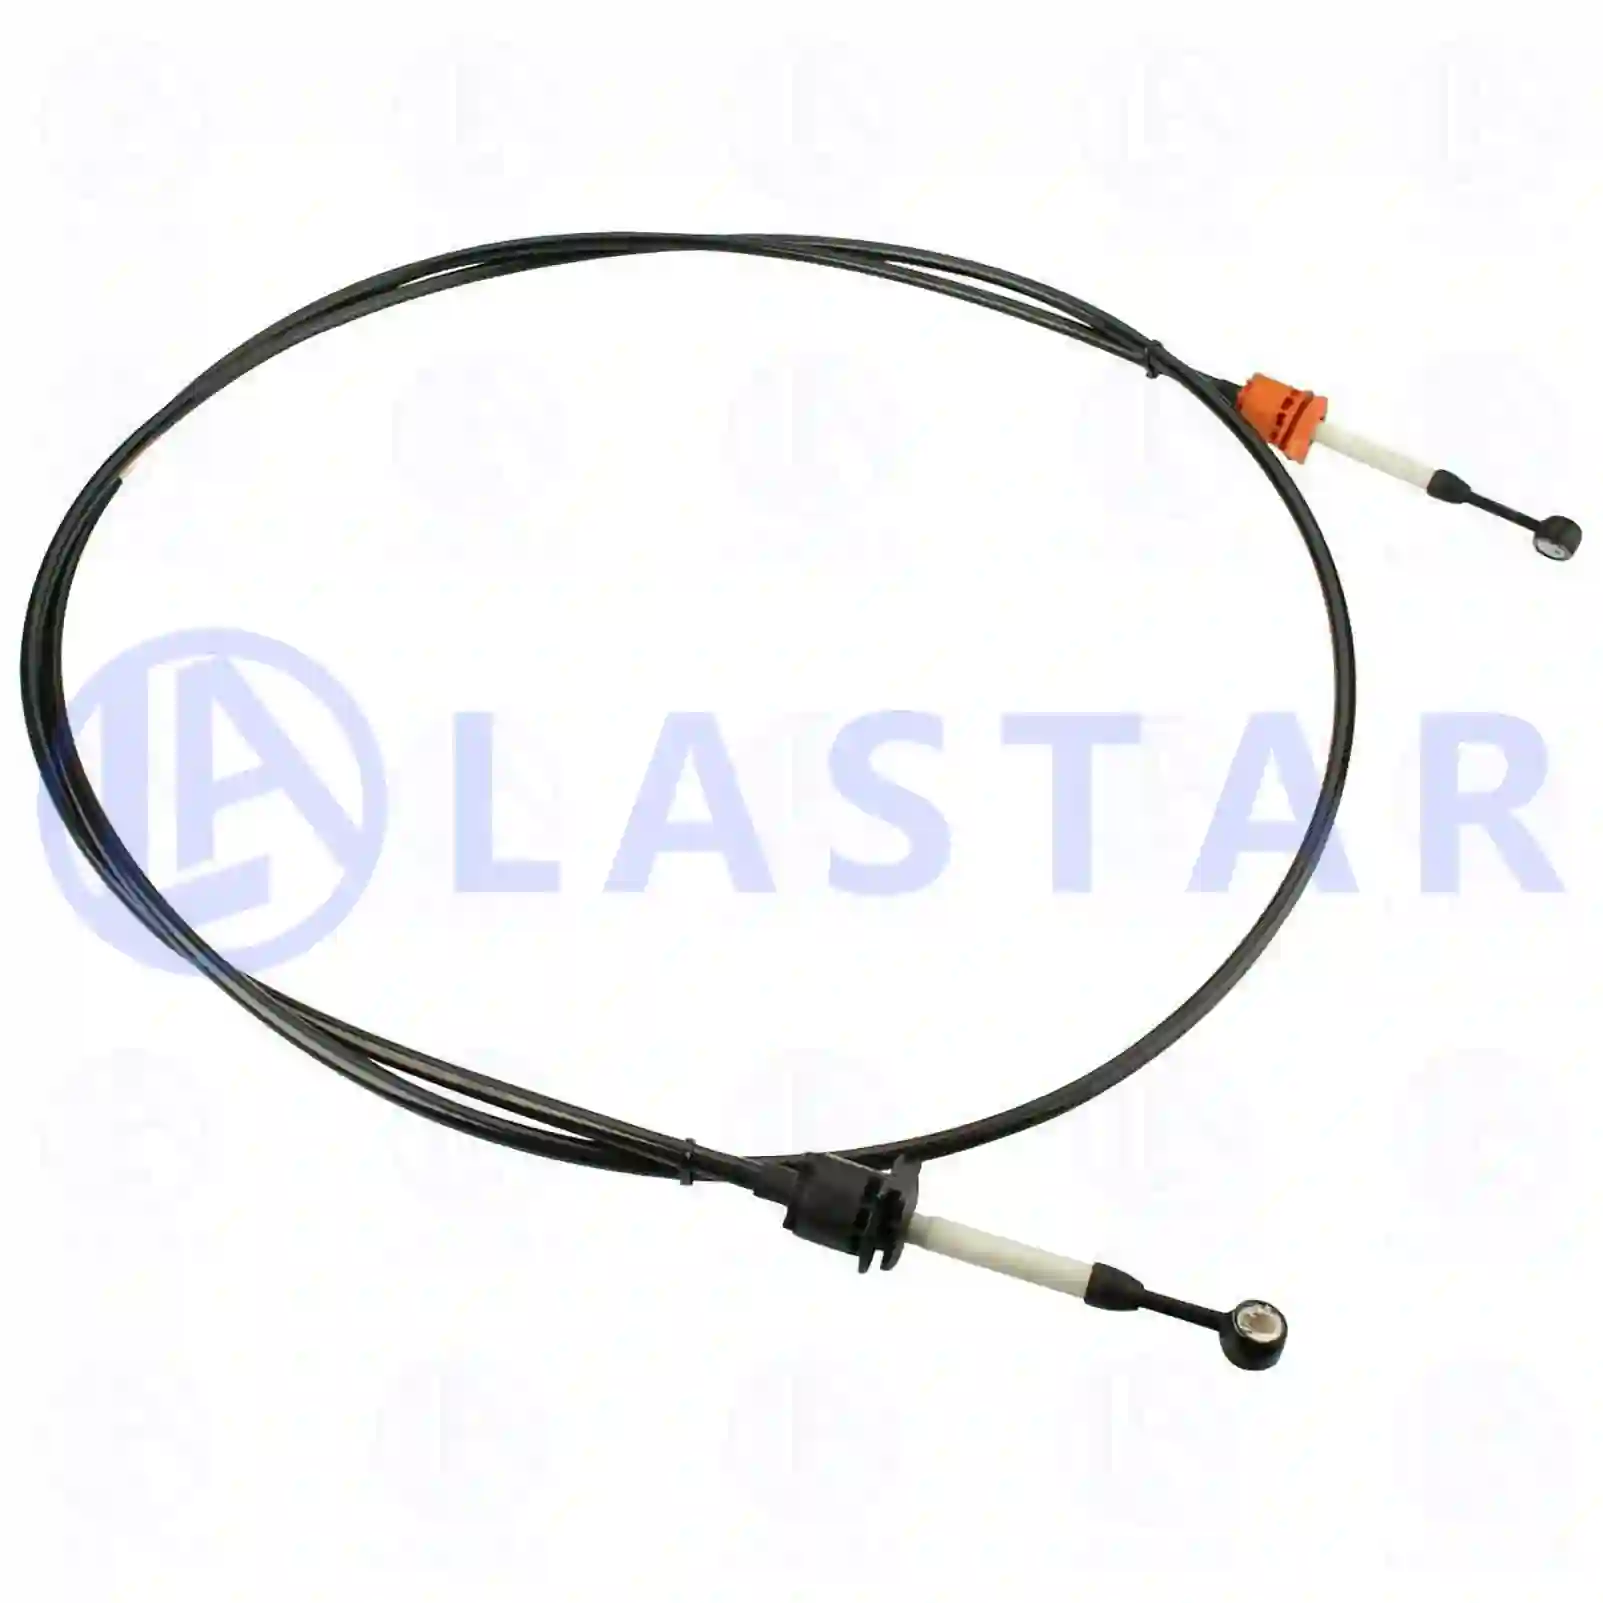 Control cable, switching, 77732416, 20545960, 20700960, 21002860, 21789676 ||  77732416 Lastar Spare Part | Truck Spare Parts, Auotomotive Spare Parts Control cable, switching, 77732416, 20545960, 20700960, 21002860, 21789676 ||  77732416 Lastar Spare Part | Truck Spare Parts, Auotomotive Spare Parts